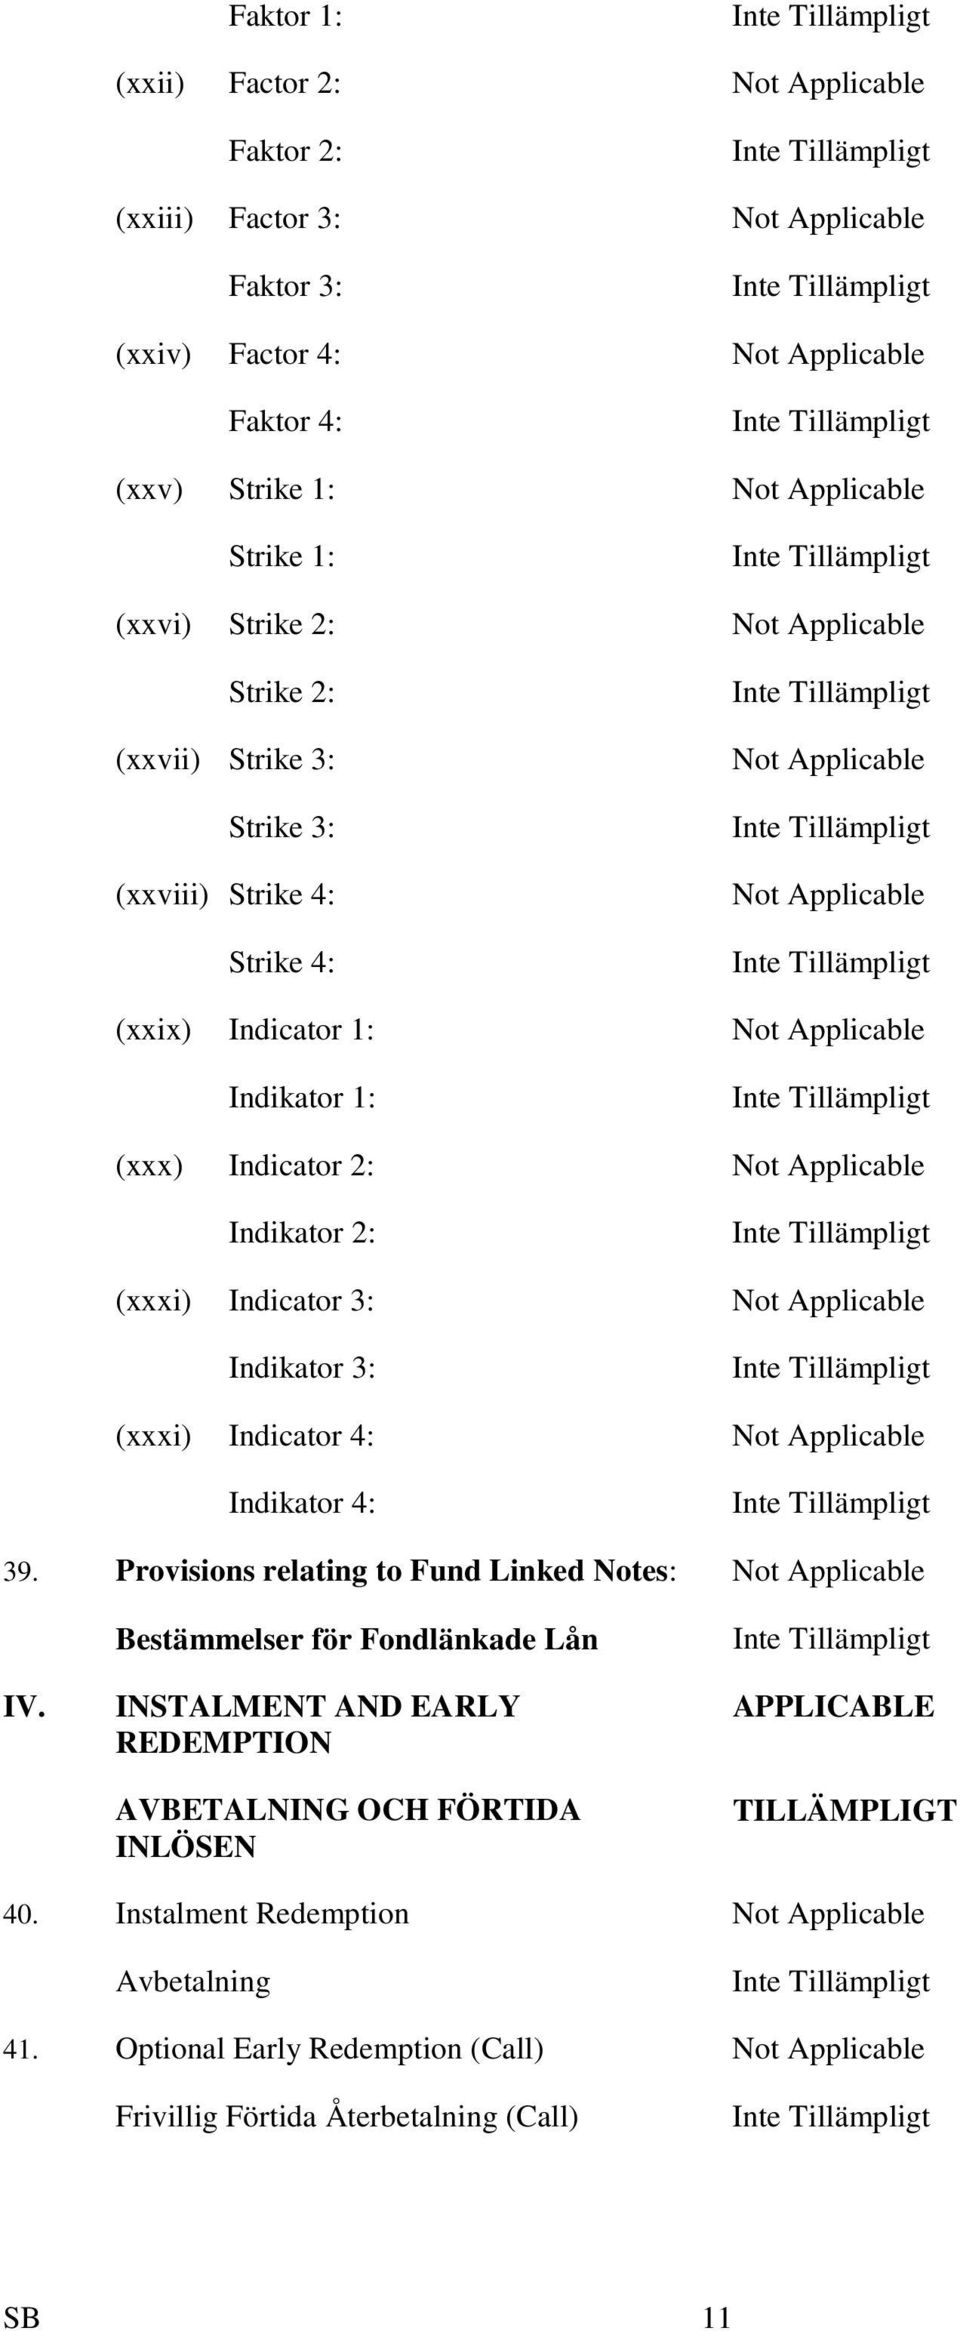 2: (xxxi) Indicator 3: Not Applicable Indikator 3: (xxxi) Indicator 4: Not Applicable Indikator 4: 39. Provisions relating to Fund Linked Notes: Not Applicable IV.